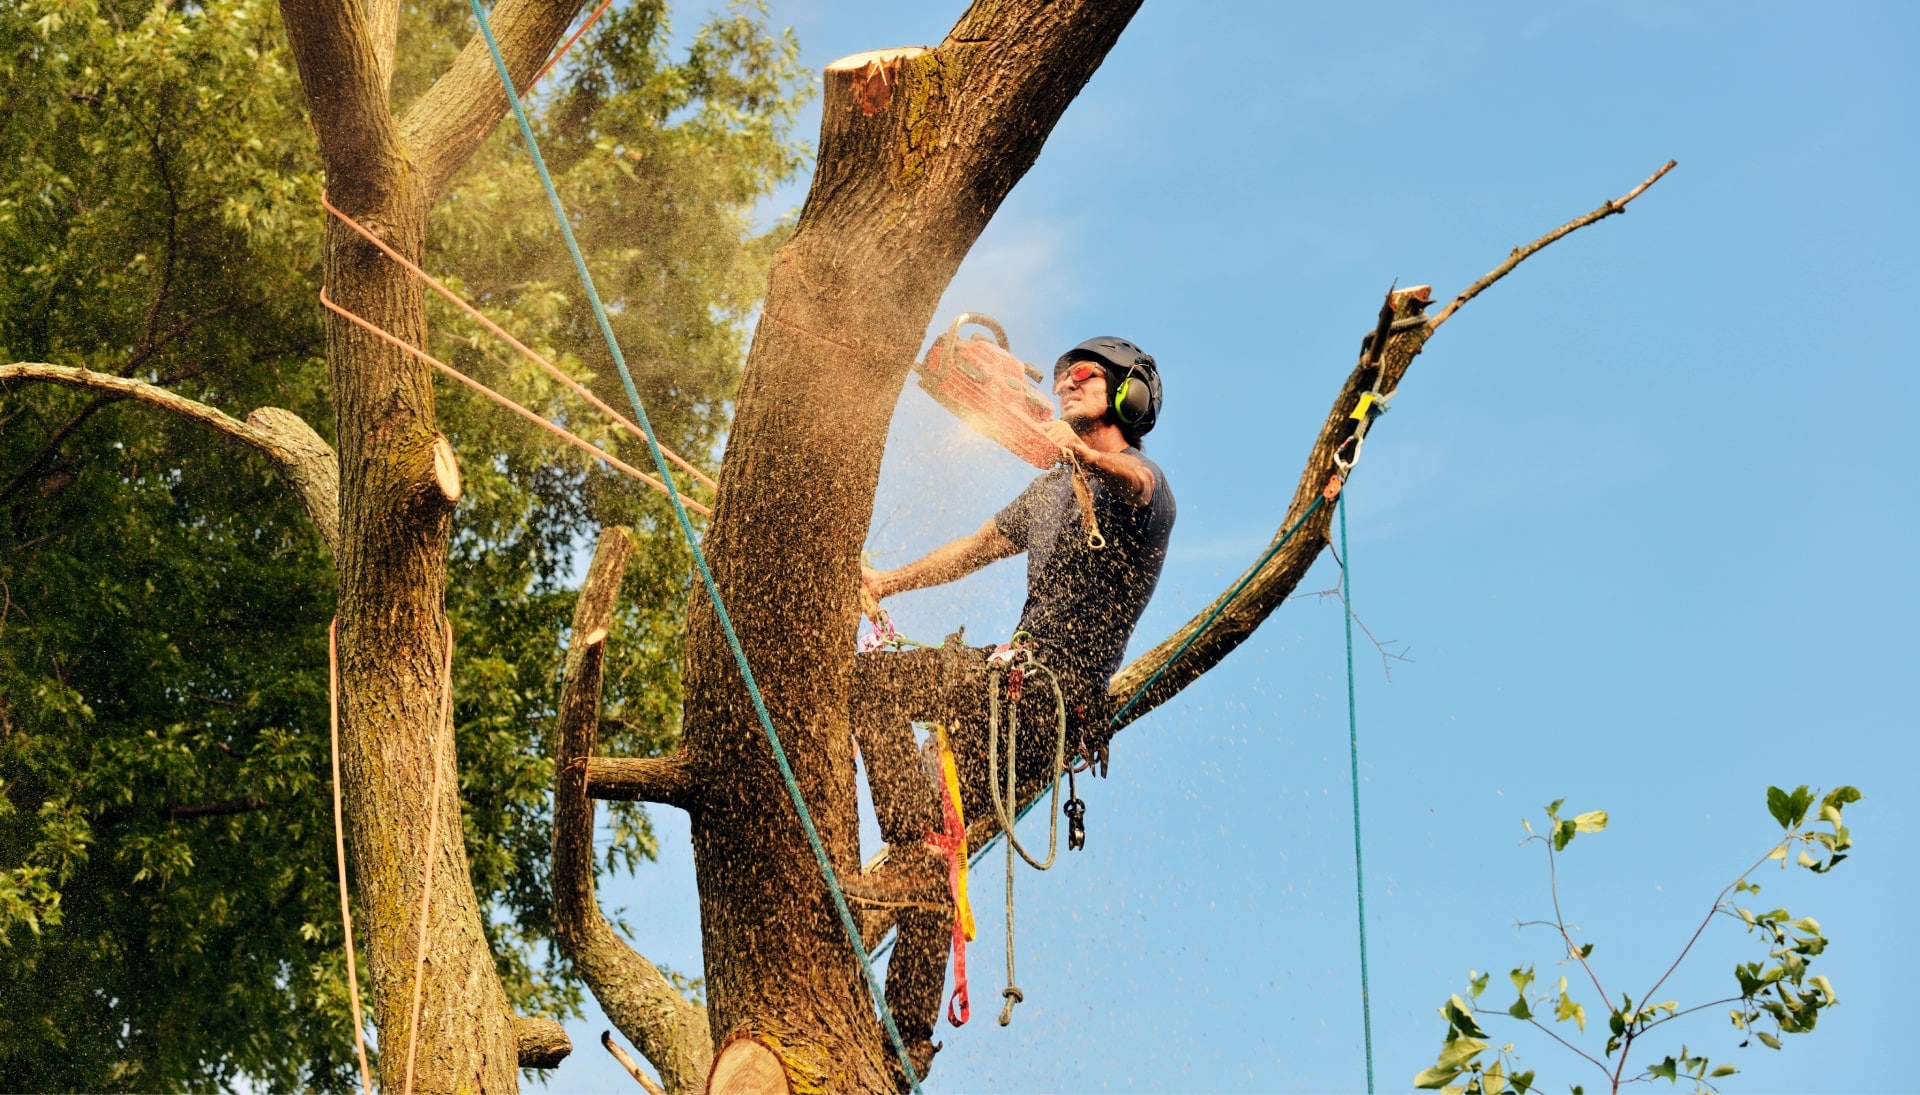 Lindsay tree removal experts solve tree issues.